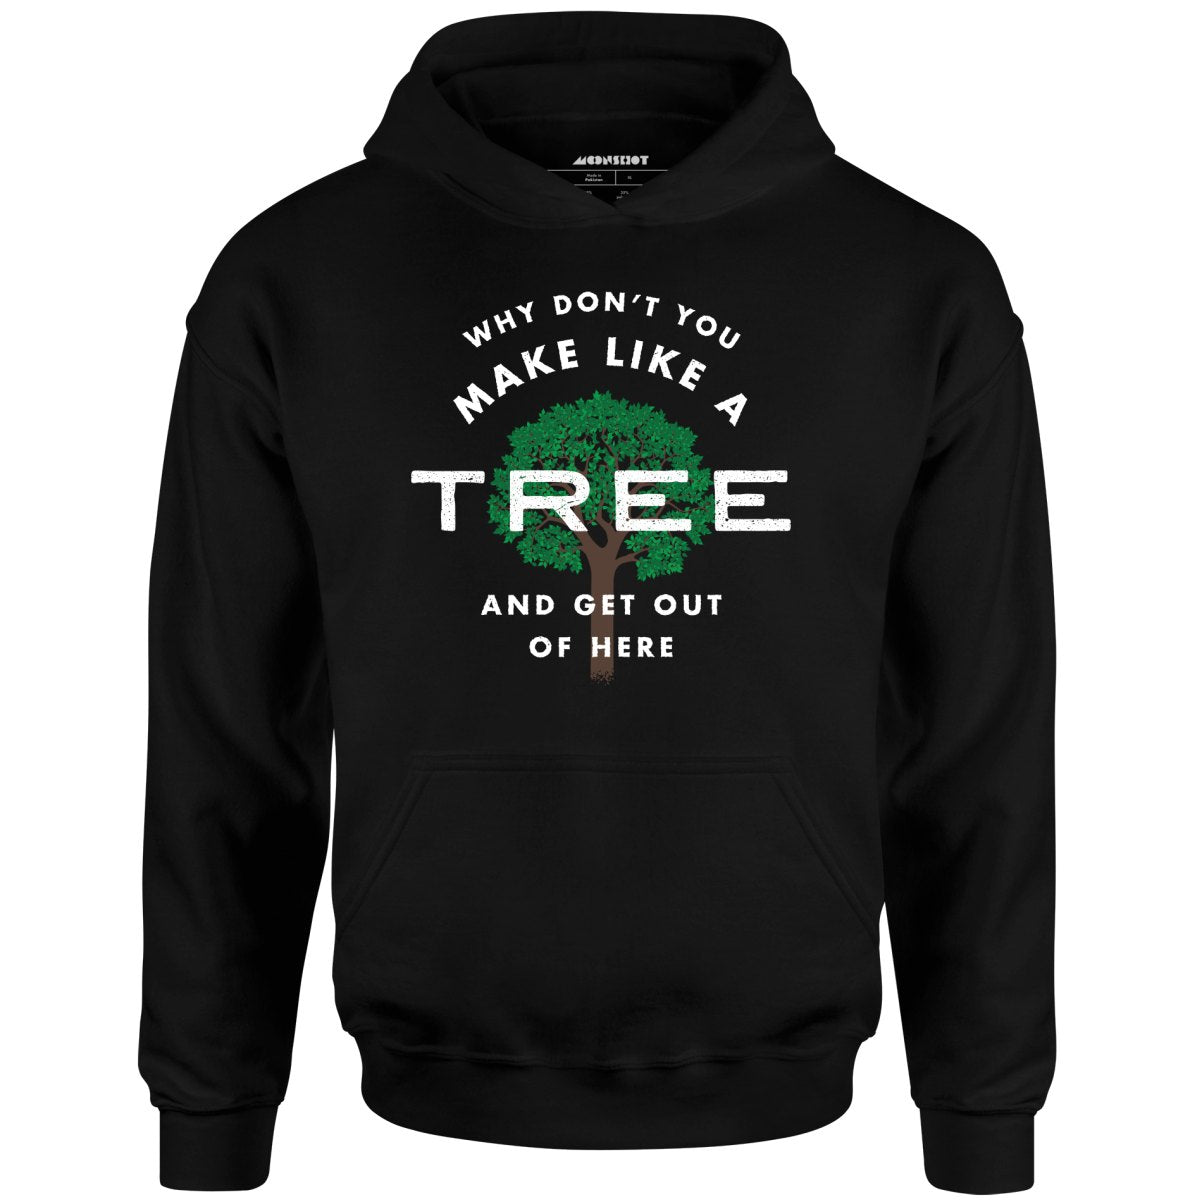 Why Don't You Make Like a Tree and Get Out of Here - Unisex Hoodie